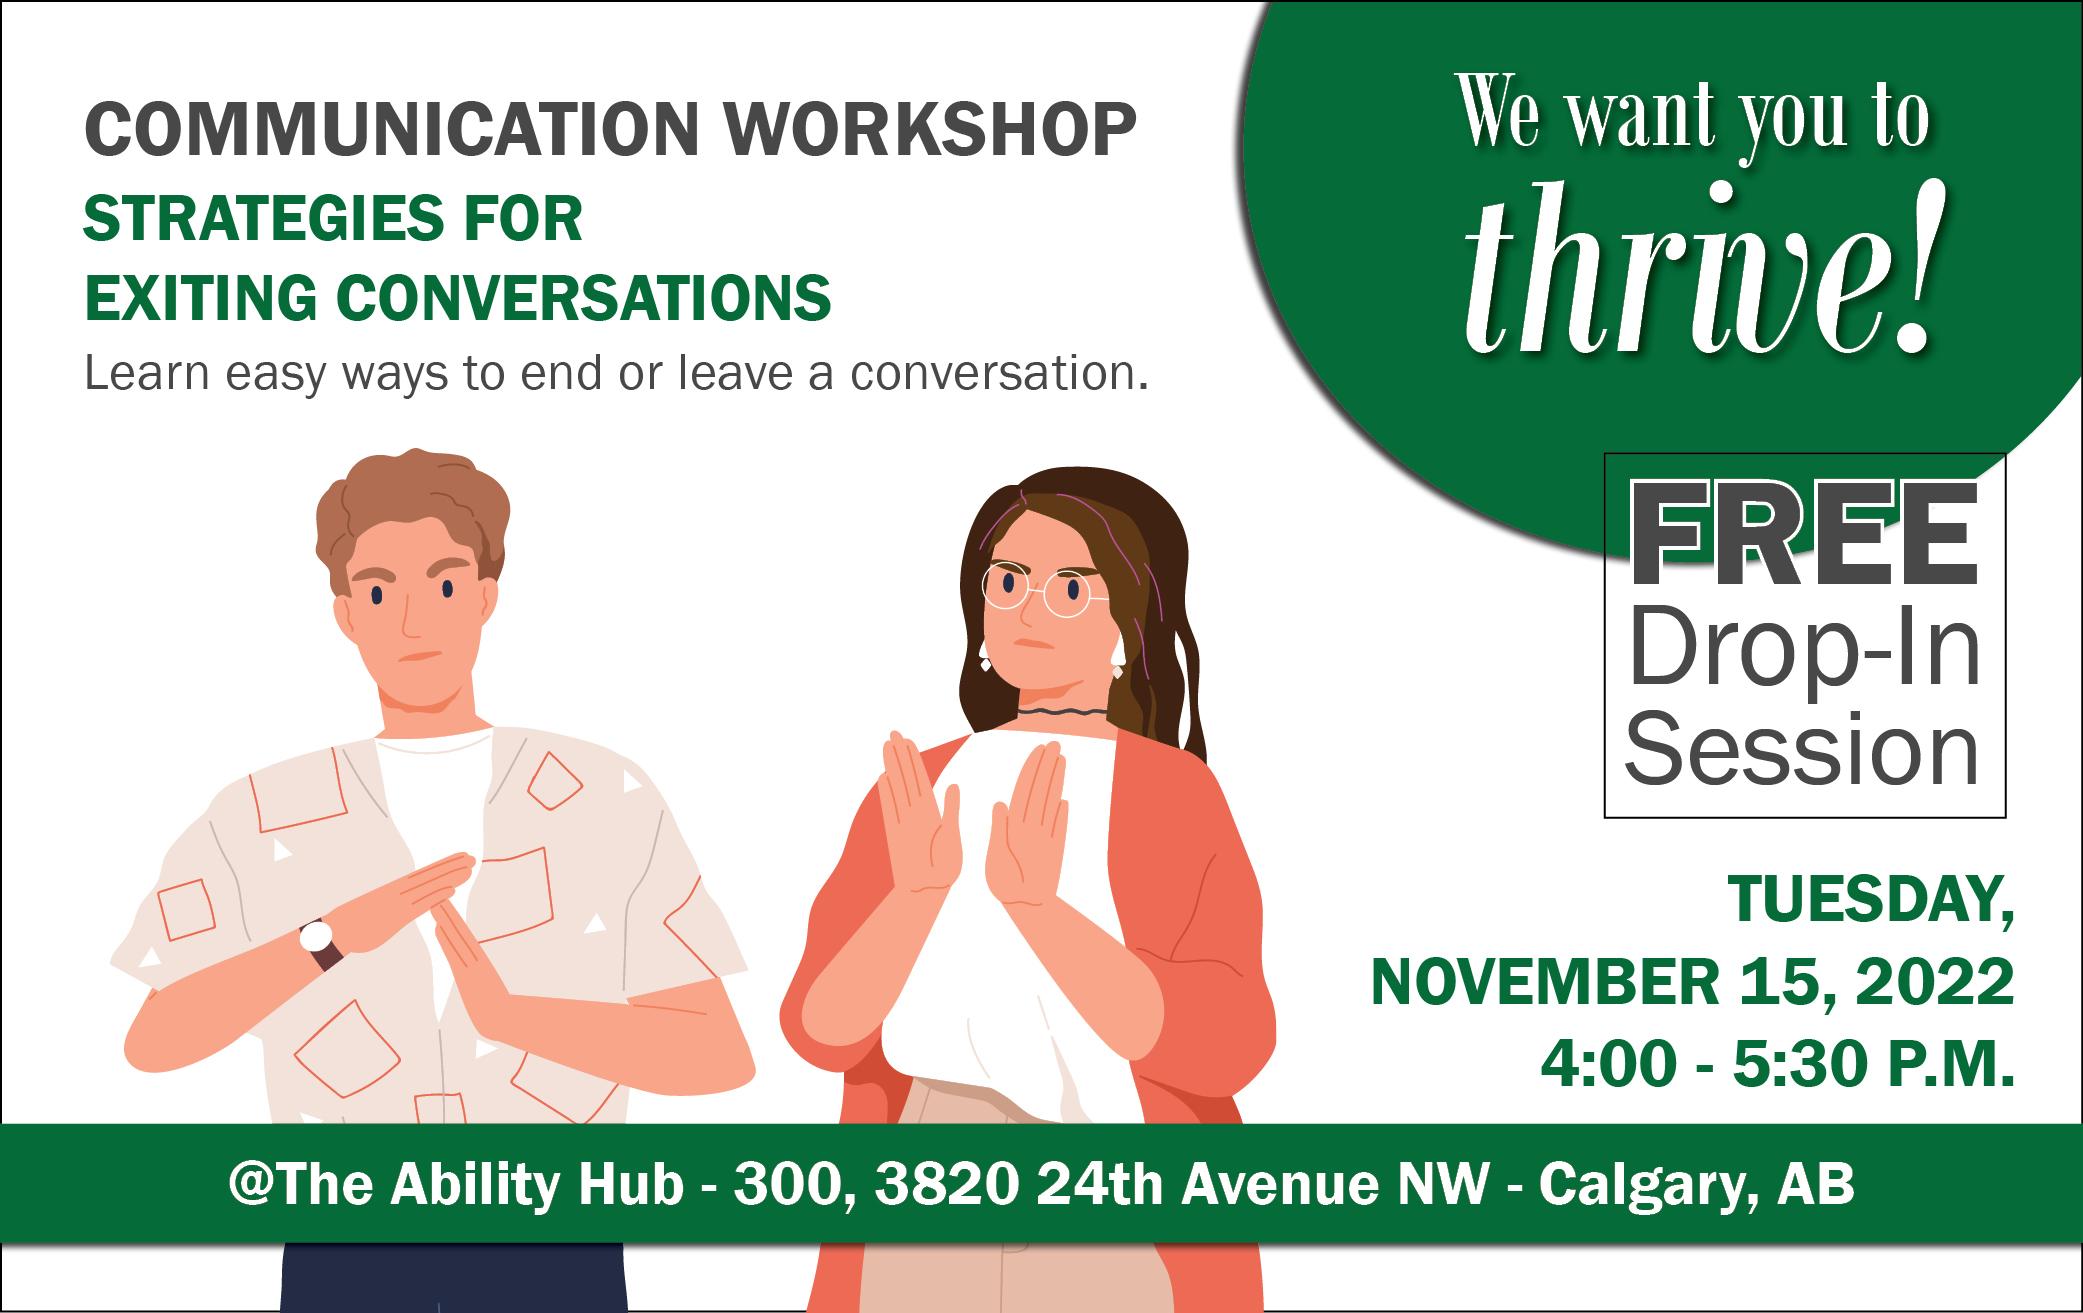 Communication Workshop, strategies for exiting conversations, easy ways to end or leave a conversation